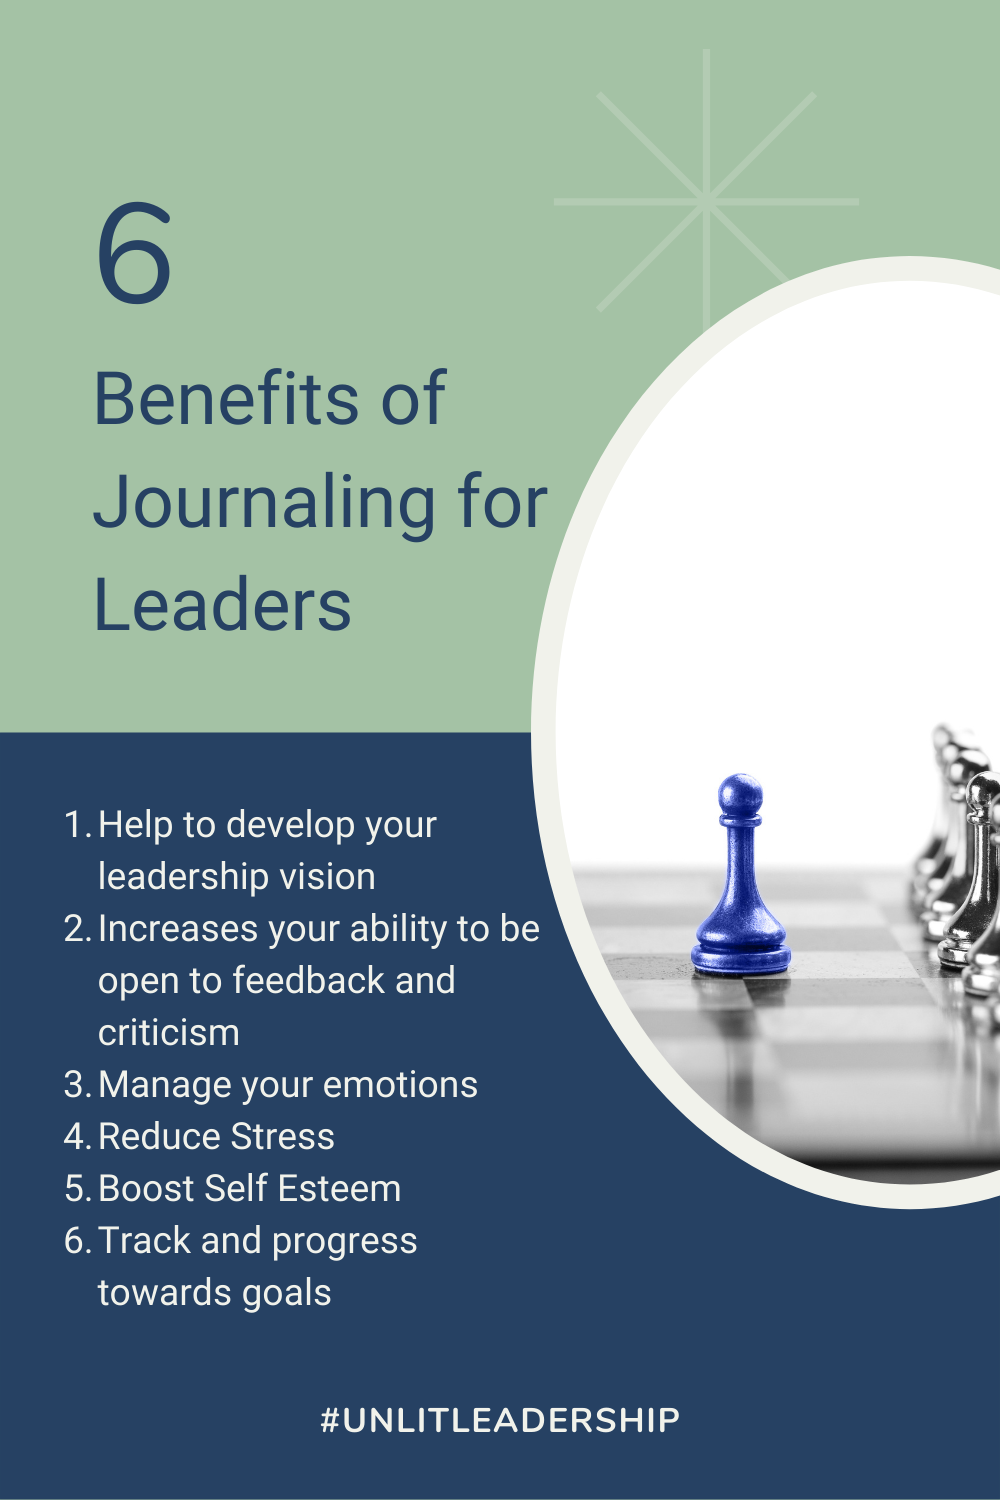 6 Benefits of Journaling for Leaders Pinterest